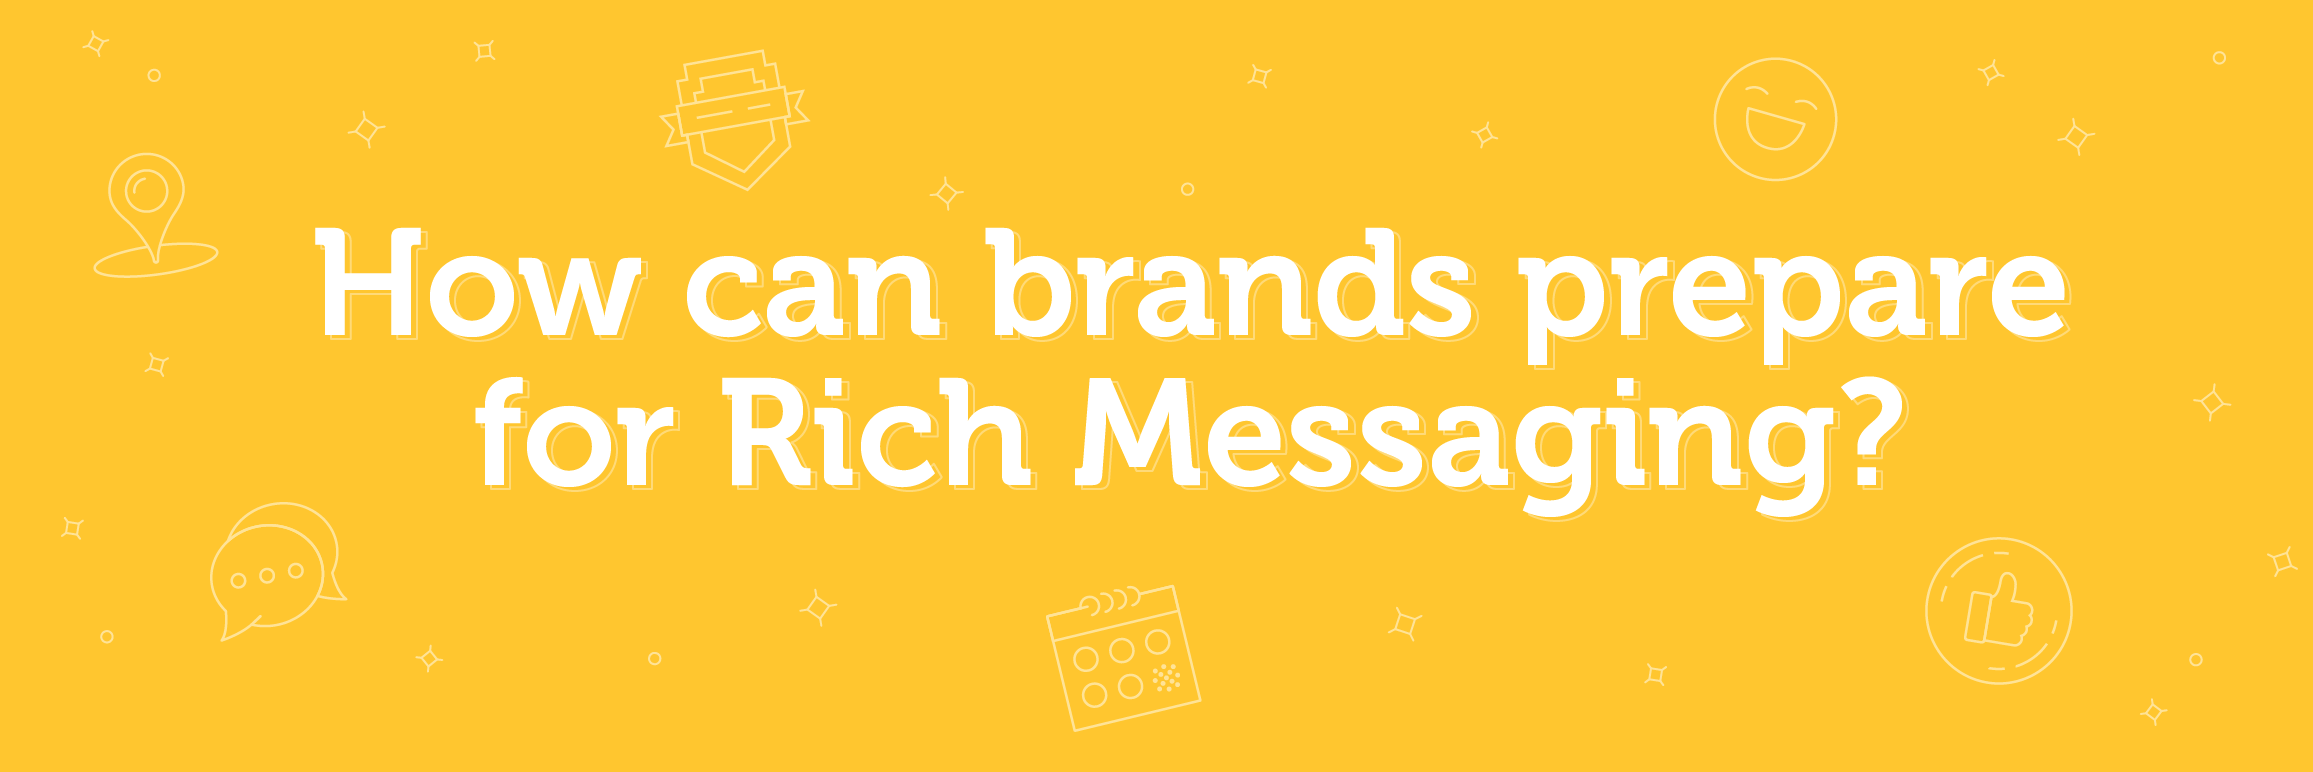 A yellow banner that says how can brands prepare for rich messaging